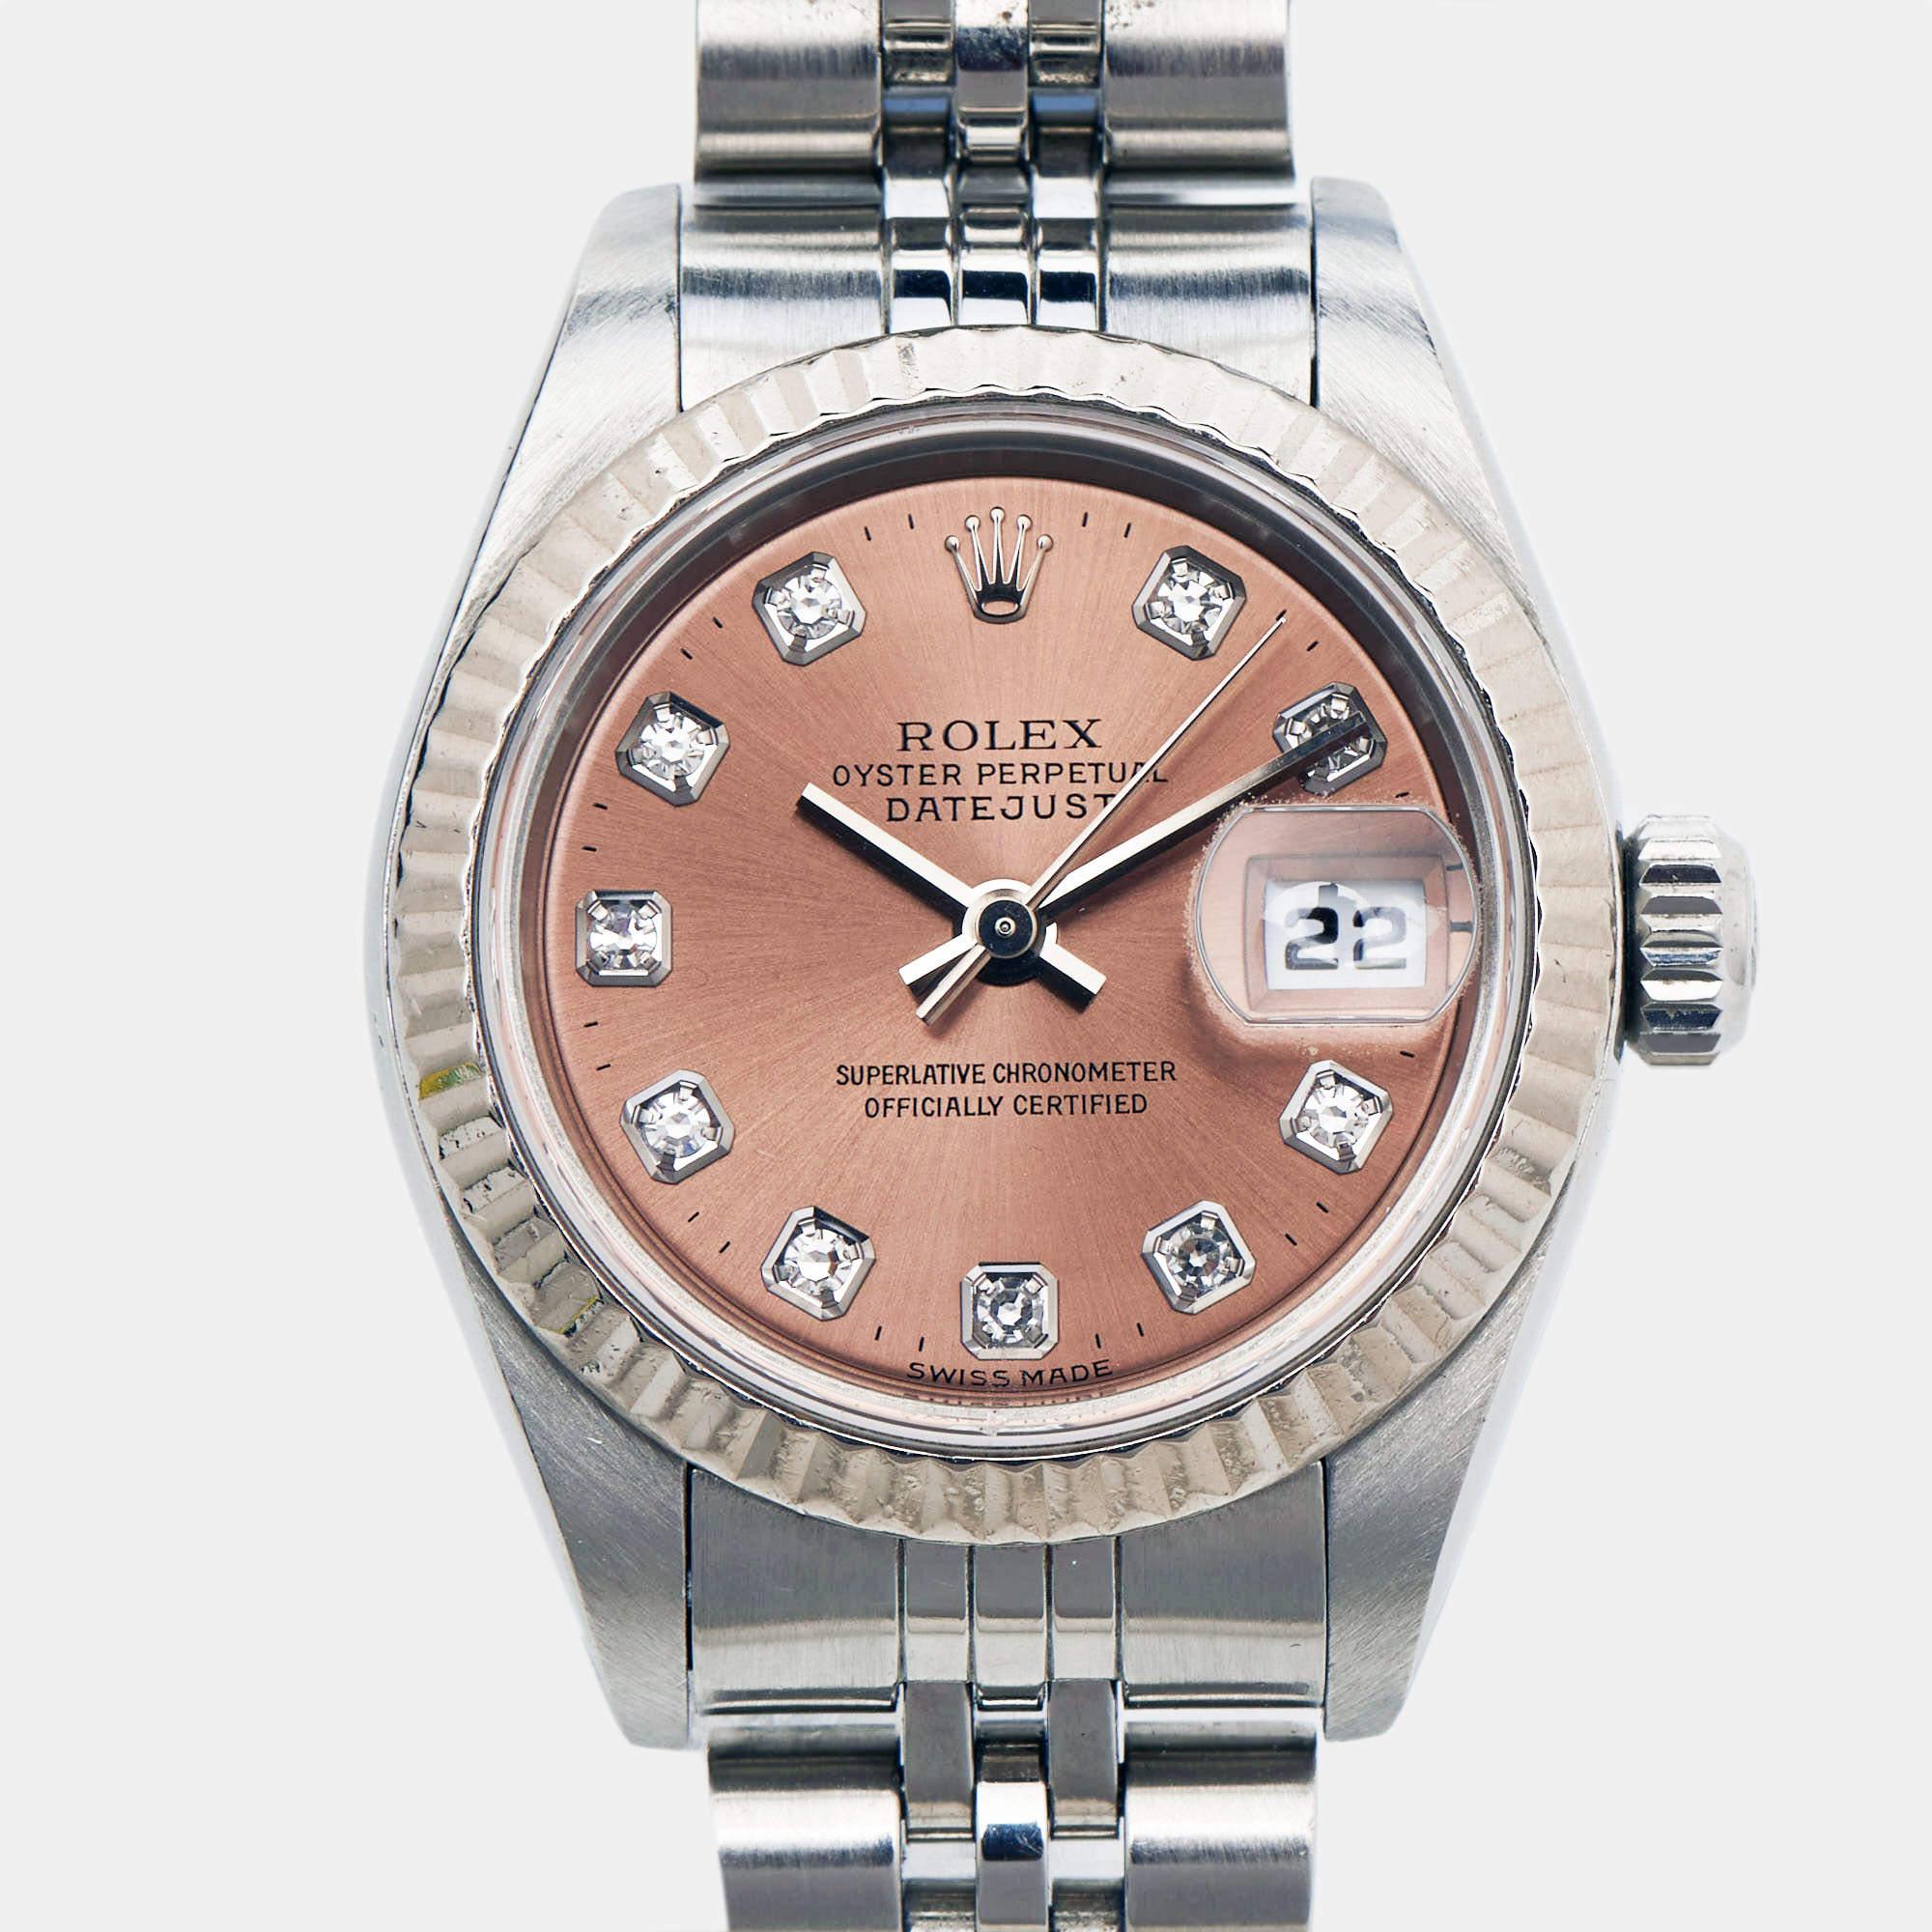 The Datejust is one of the most recognized and coveted watches from the house of Rolex. It has a distinct look and an irrefutable appeal. Crafted in stainless steel & 18k white gold and detailed with diamonds on the pink dial, this authentic Rolex